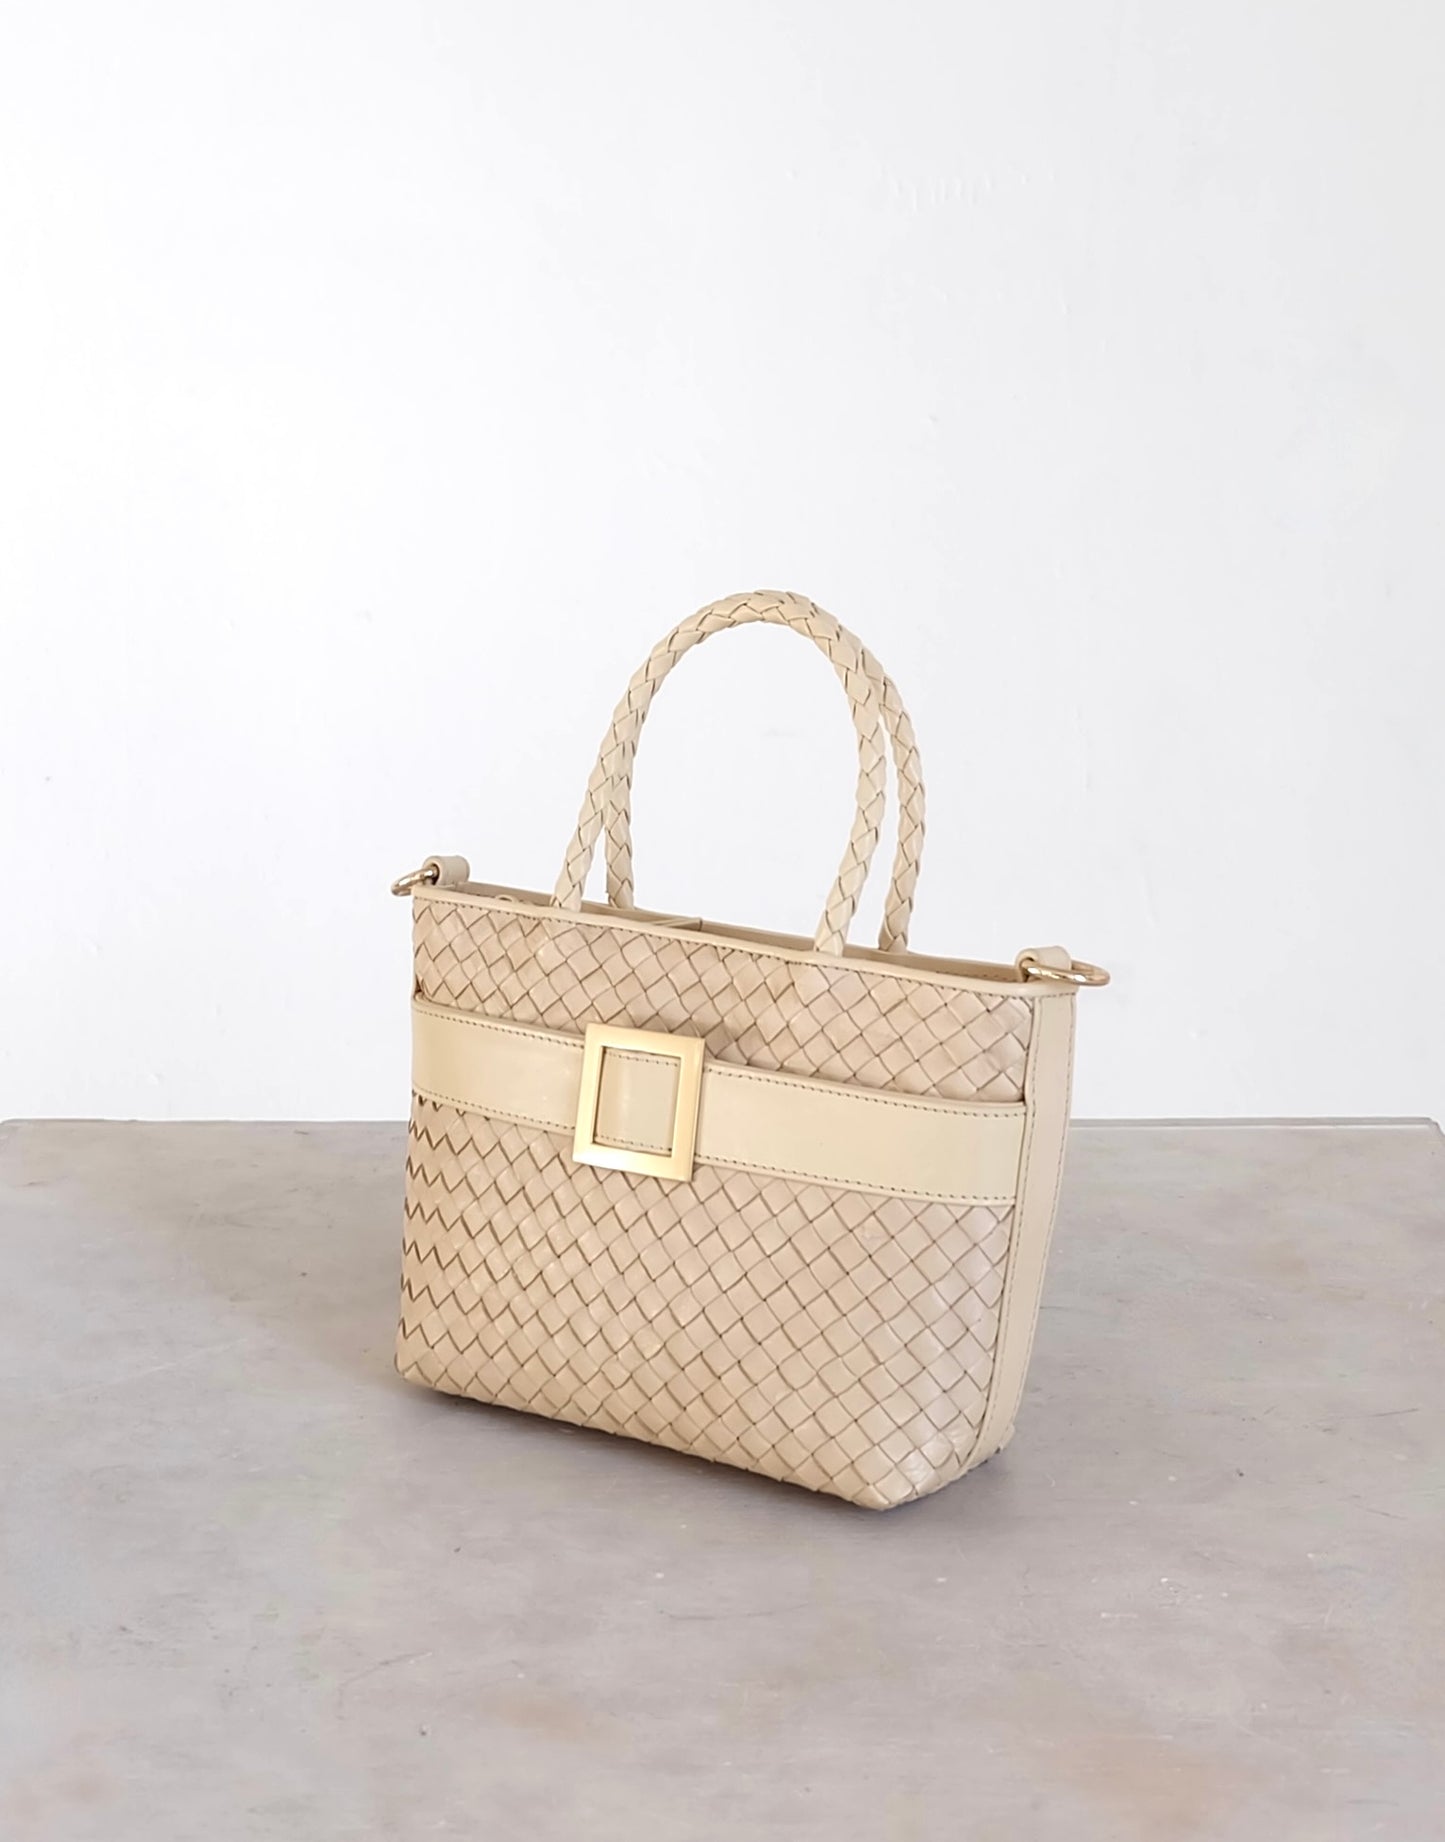 Sustainable Italian leather designer handbag in cream. Braided mini tote bag and crossbody in one, with accent buckle and front compartment.